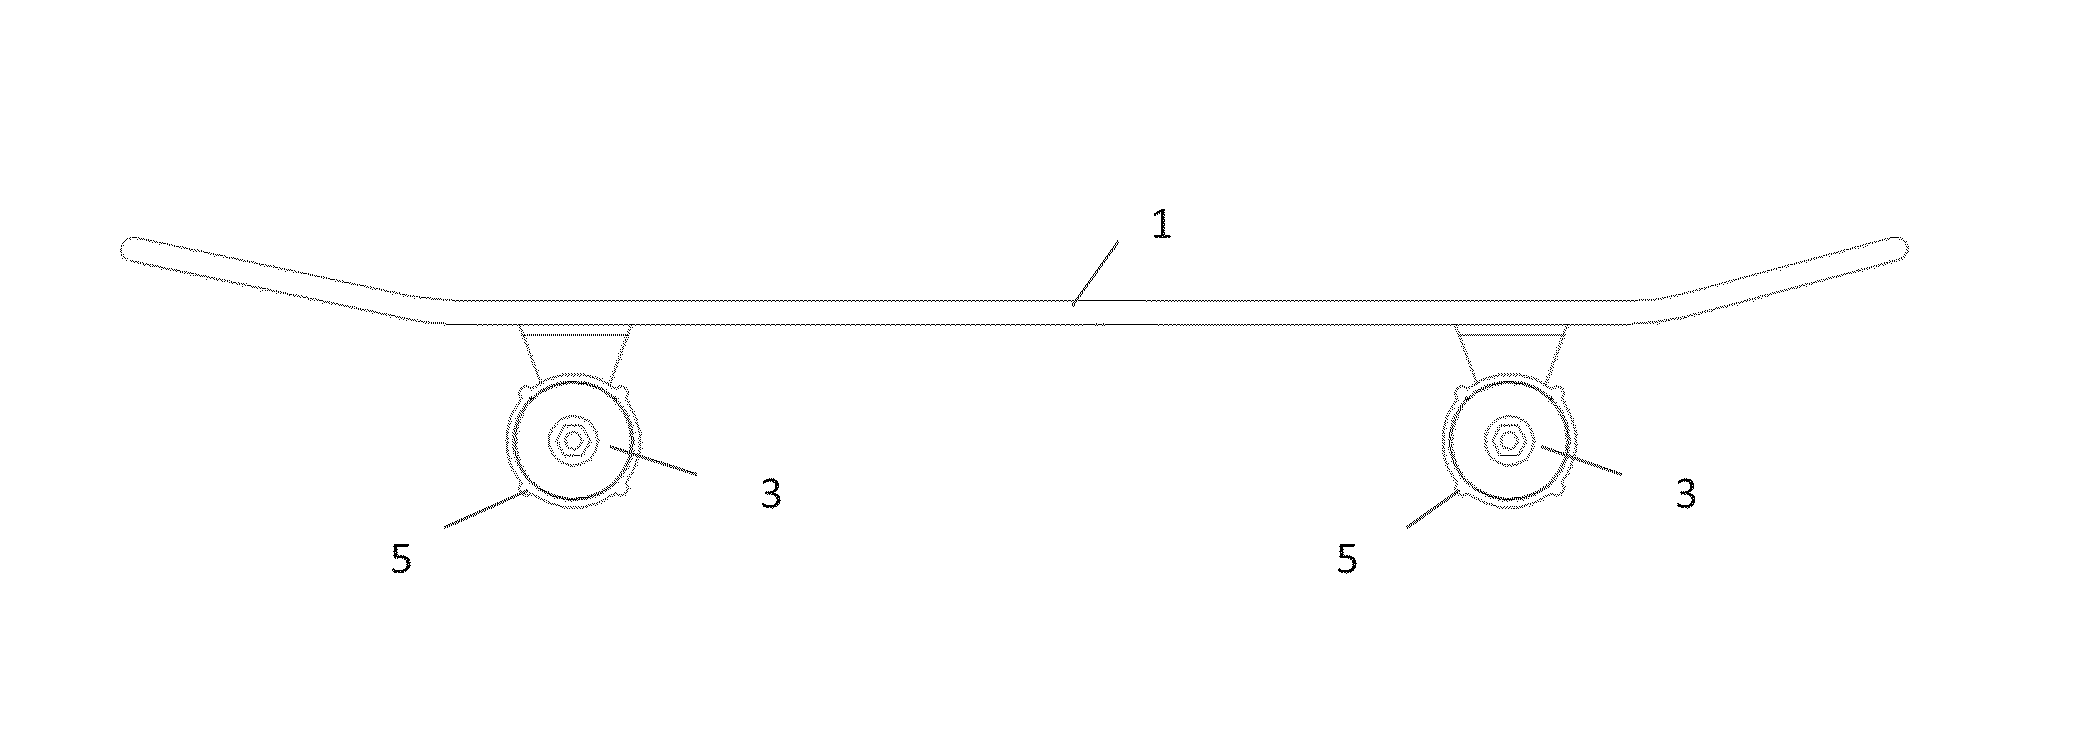 Device for limiting rotation of a wheel